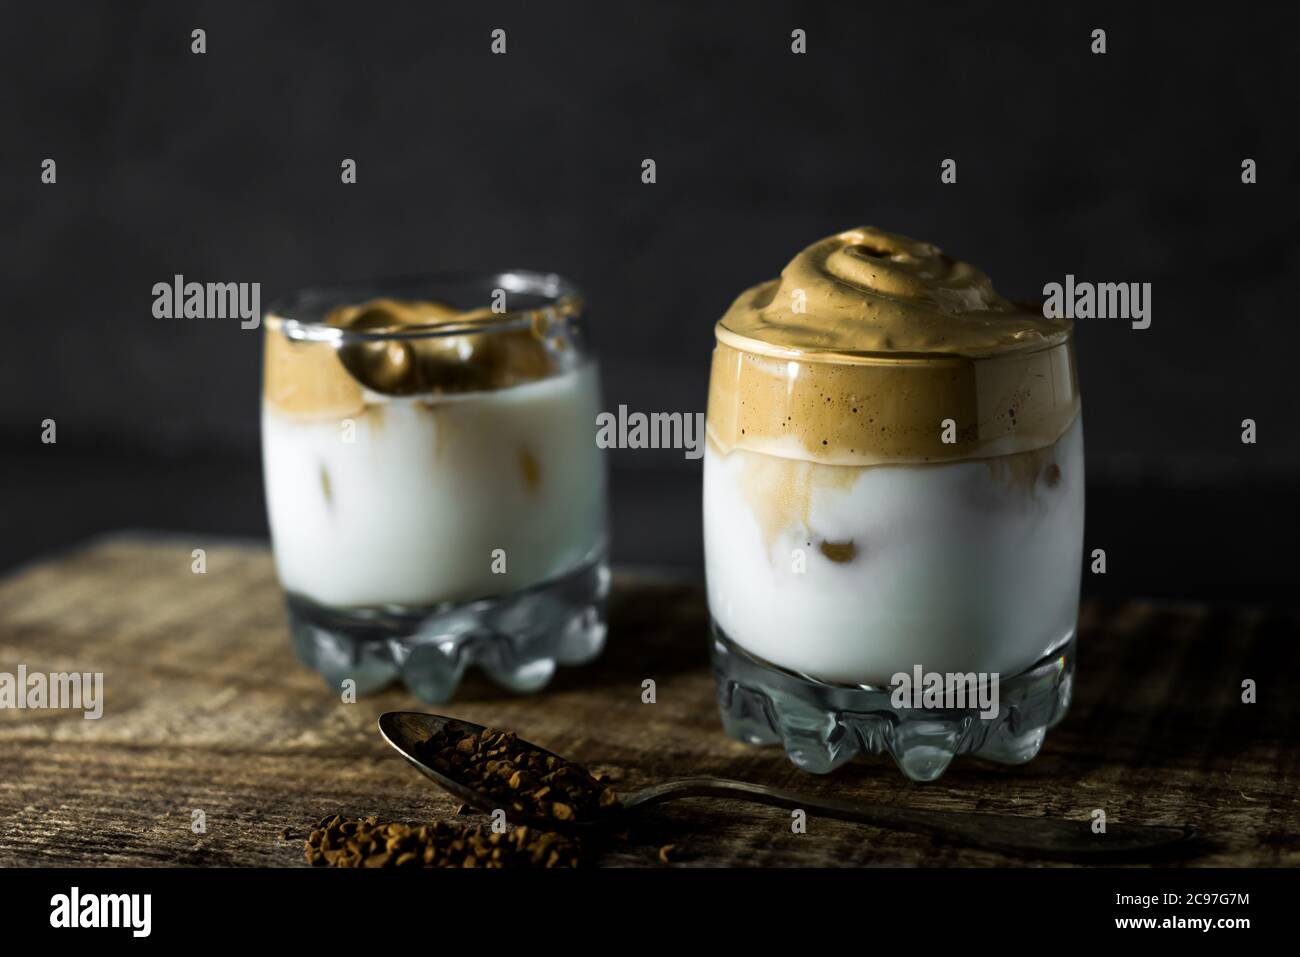 Dalgona Coffee in a transparent cup on a dark background. South Korean drink with whipped instant coffee, sugar and milk. Stock Photo